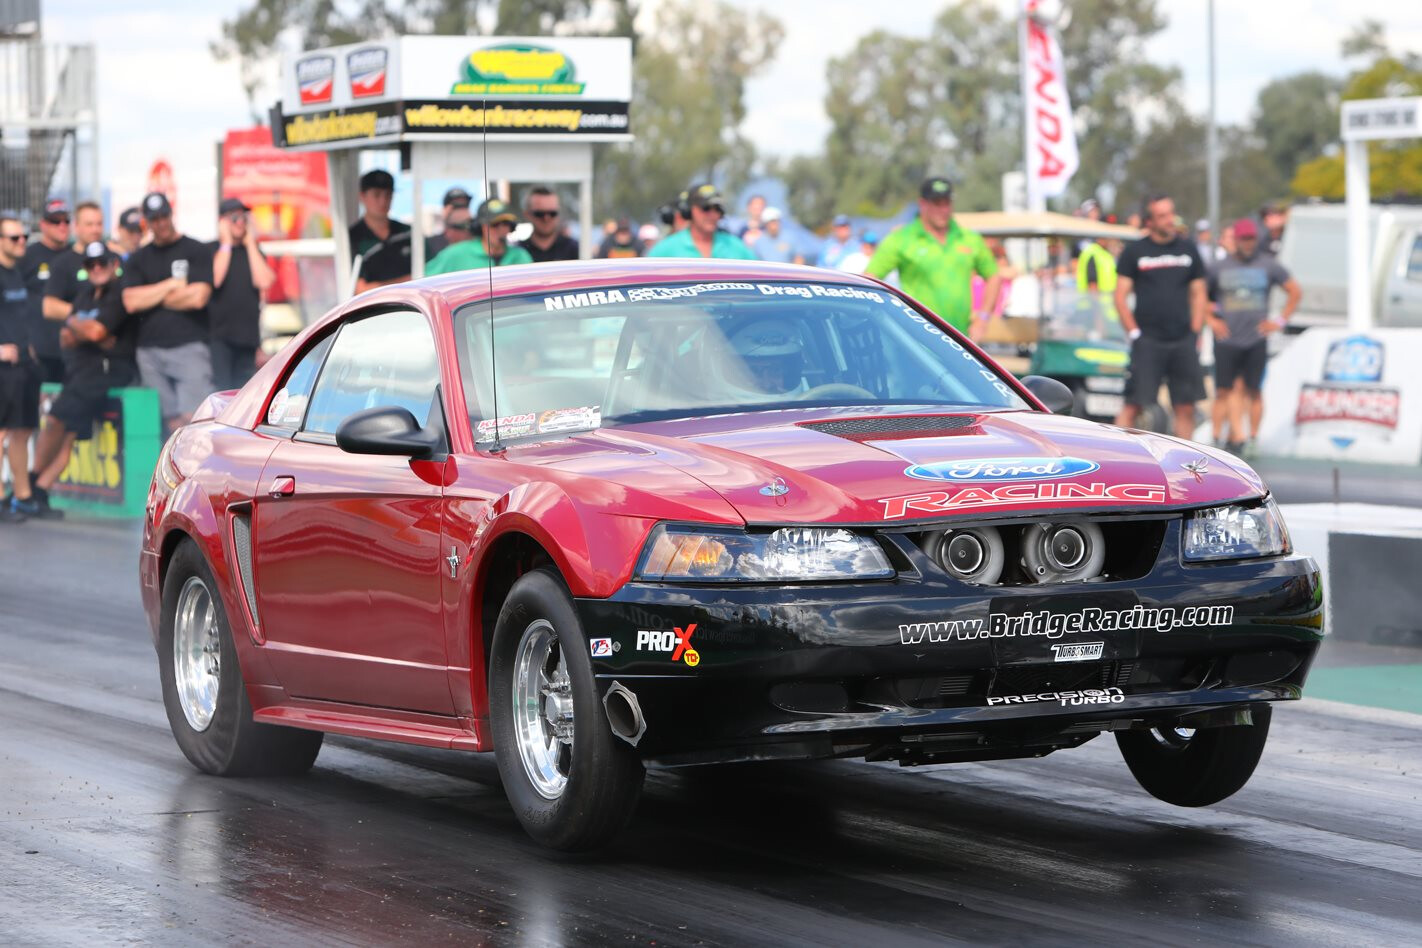 DRAG RADIAL MUSTANG WITH TWIN-TURBO MOD MOTOR